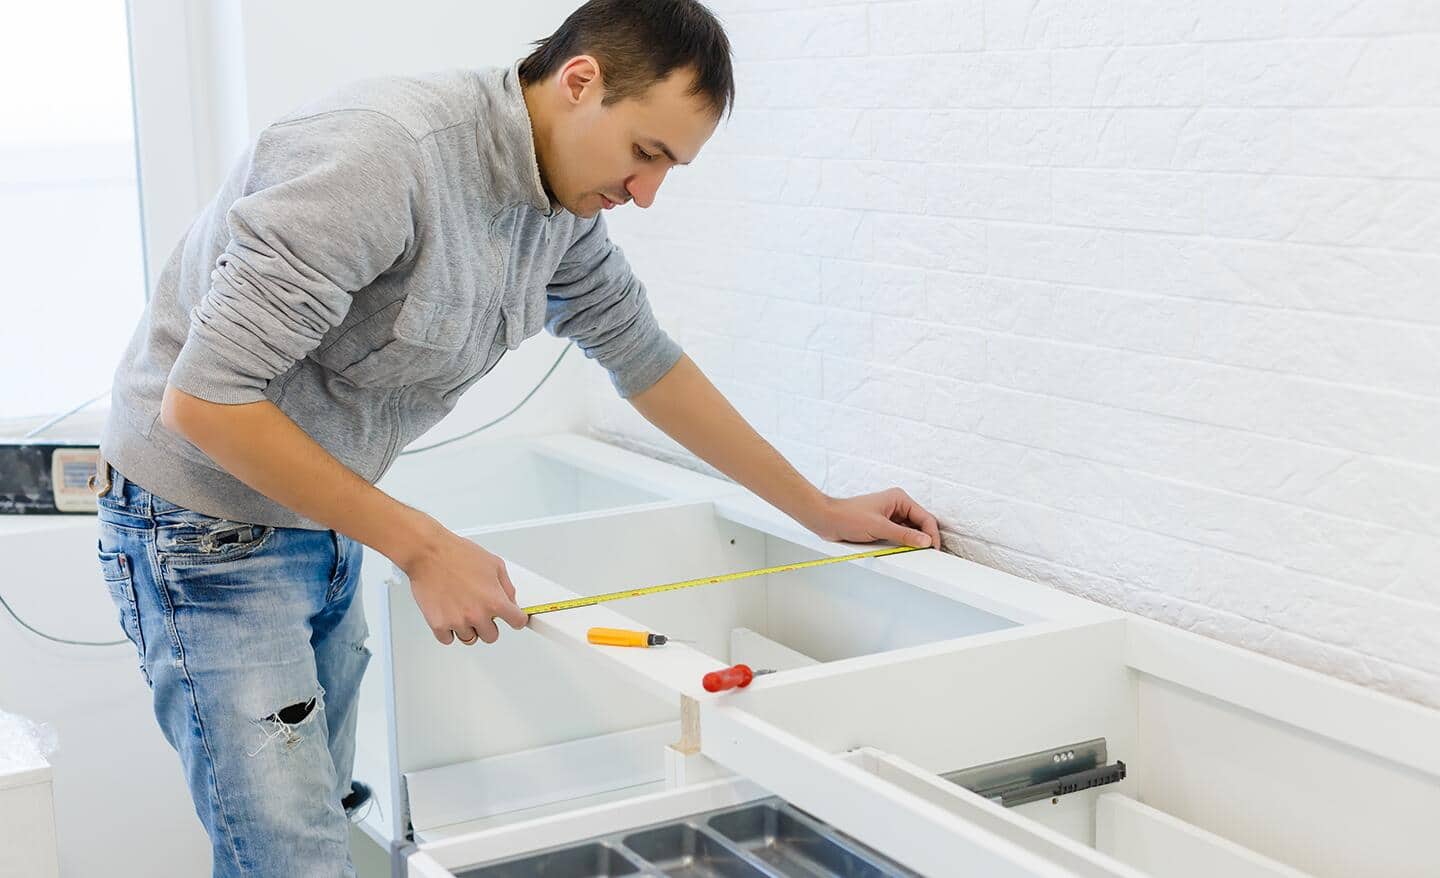 A person makes a measurement of the space to install the countertop.